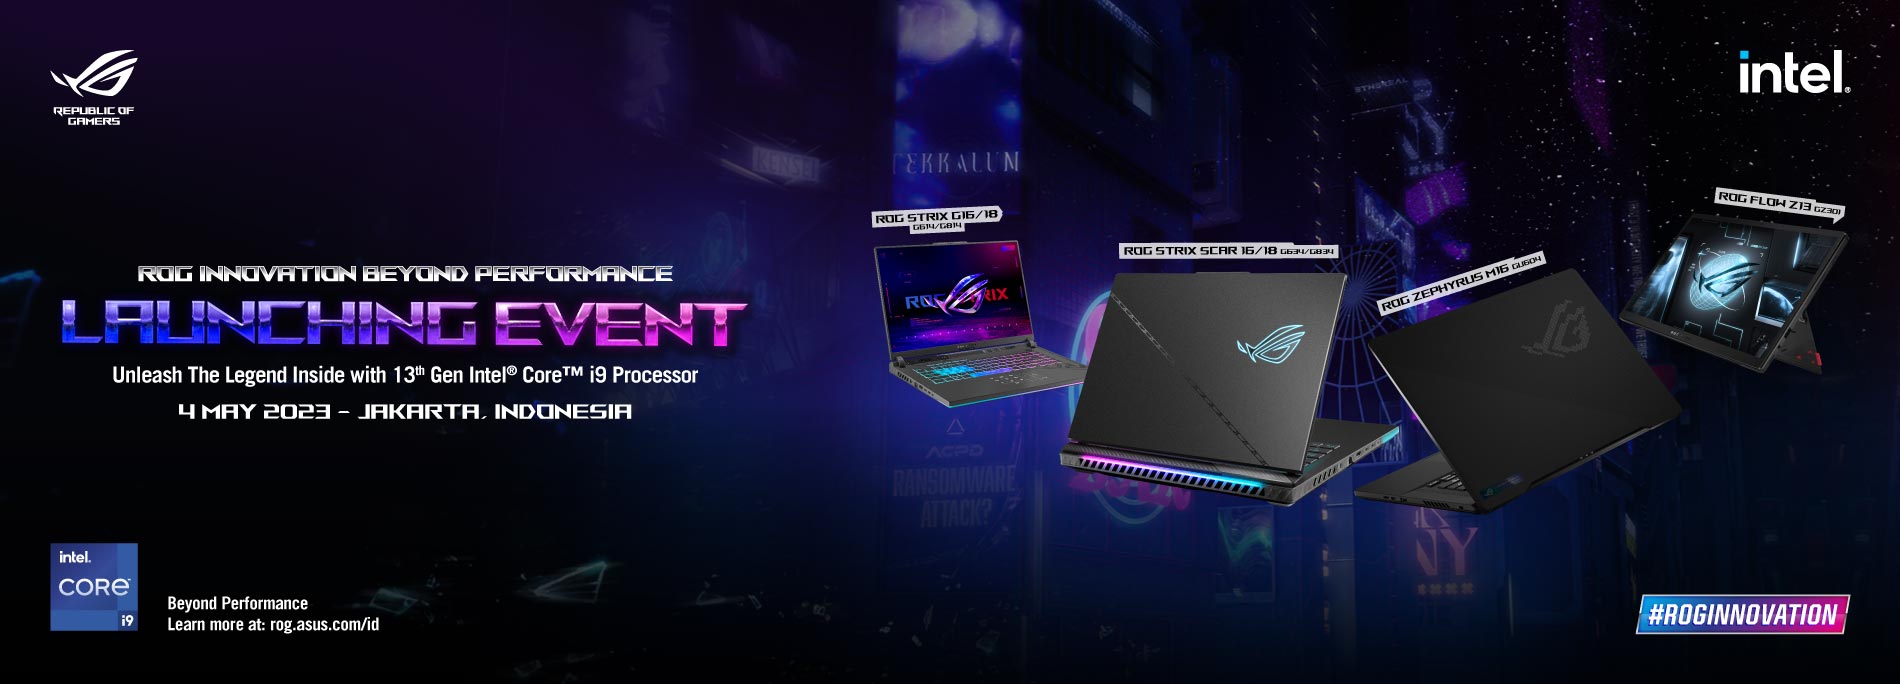 ROG Innovation Beyond Performance - Launch Event